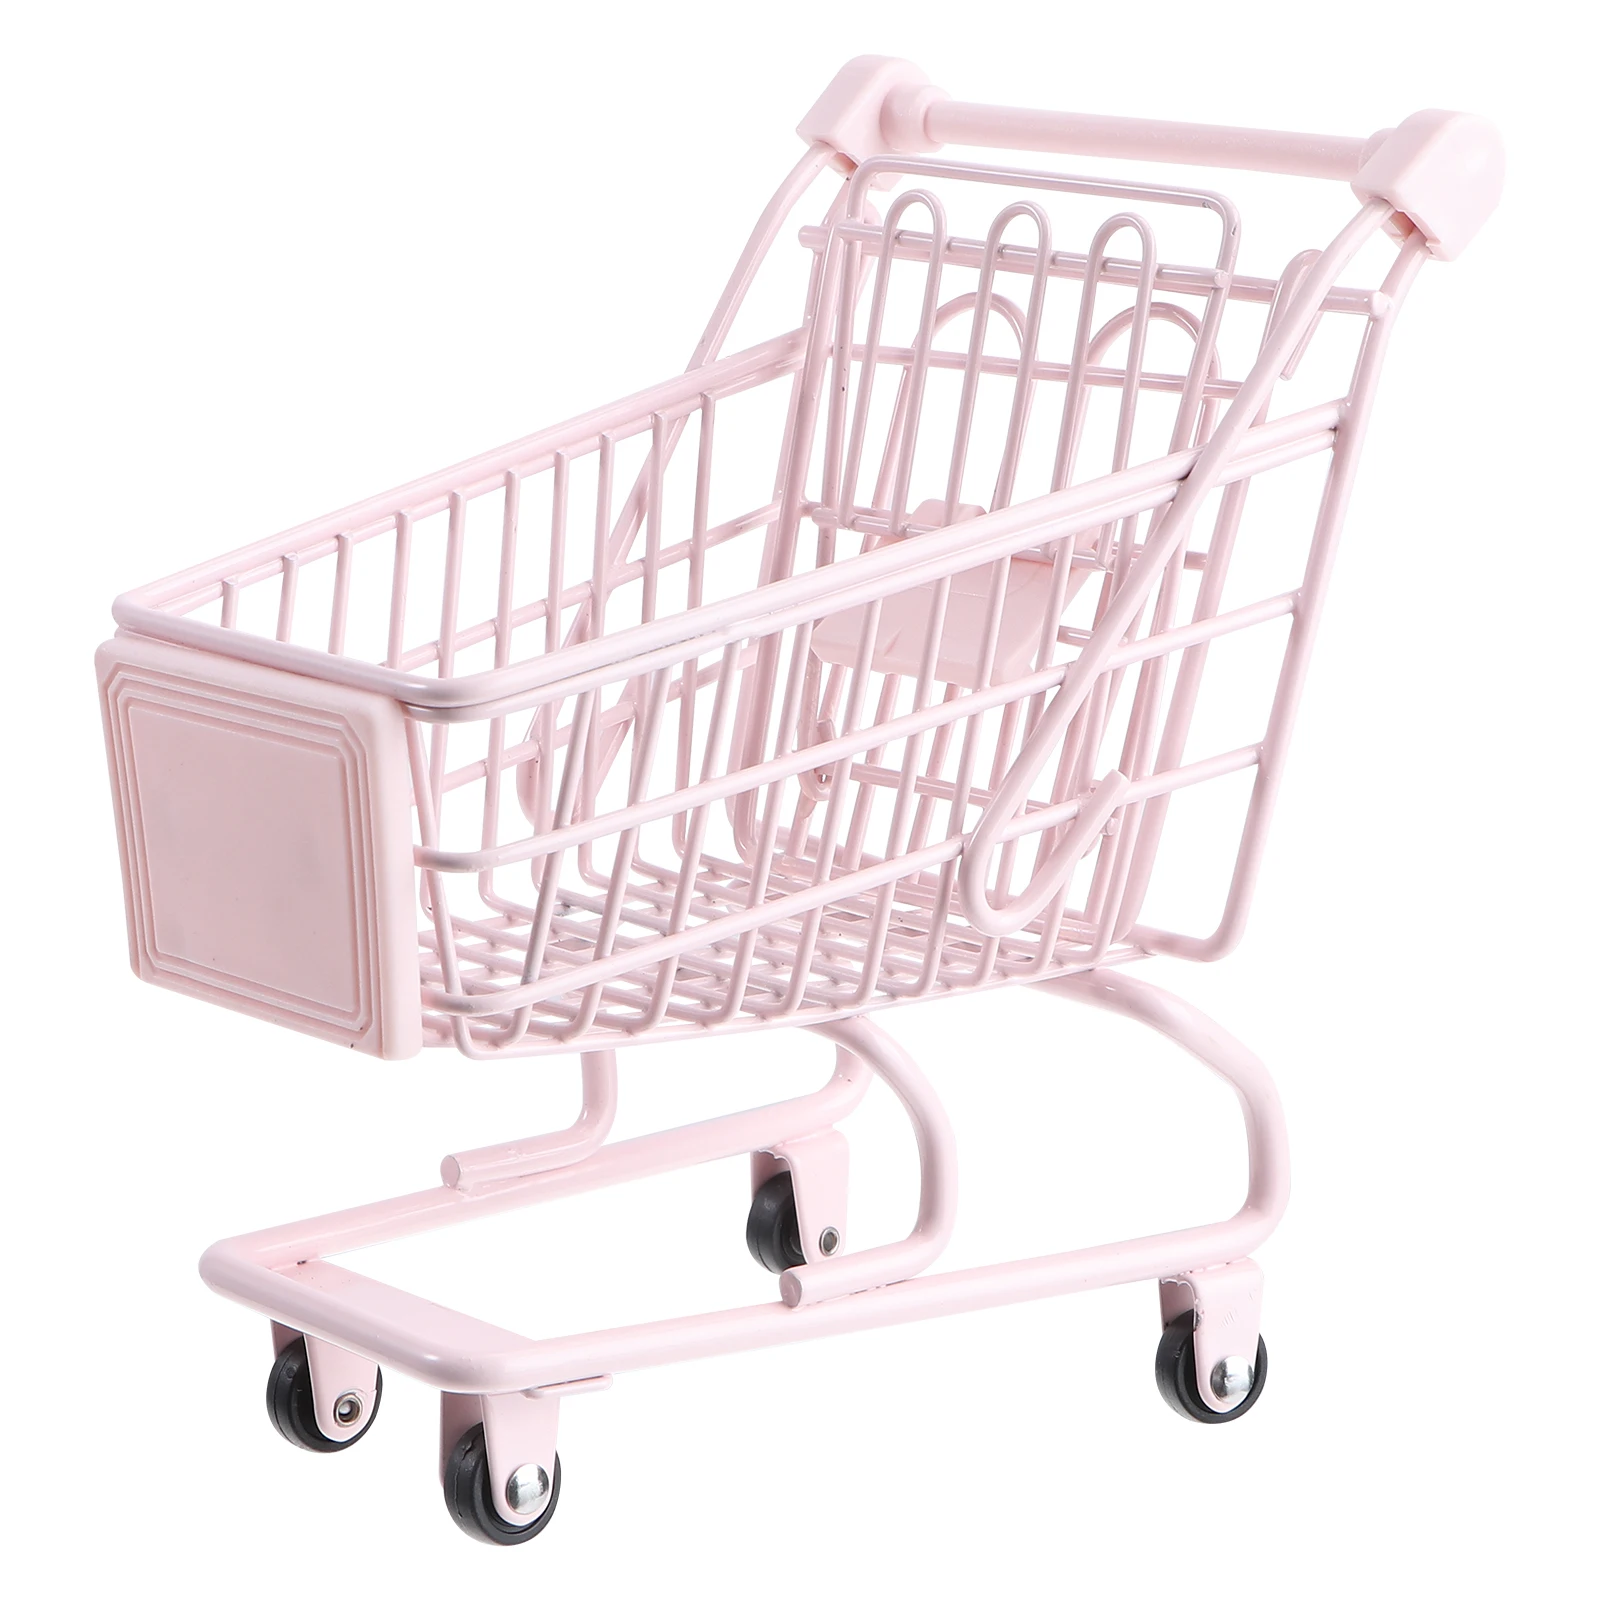 Simulation Iron Trolley Grocery Shopping Cart Basket Rolling With Wheels Toy RD 